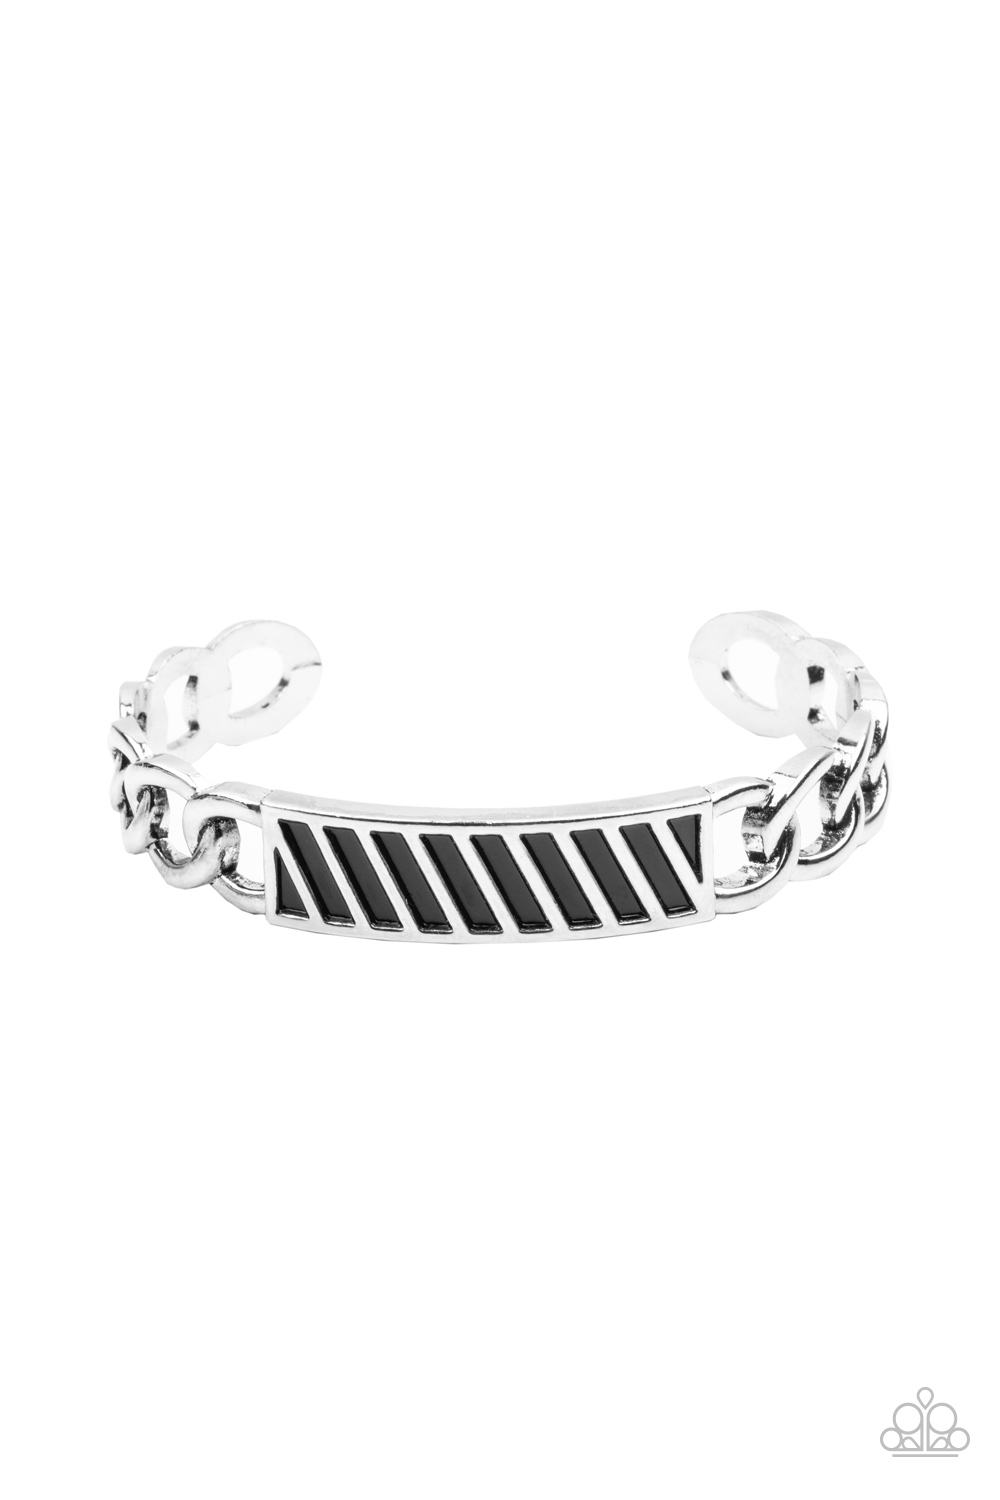 Bracelet - Keep Your Guard Up - Silver